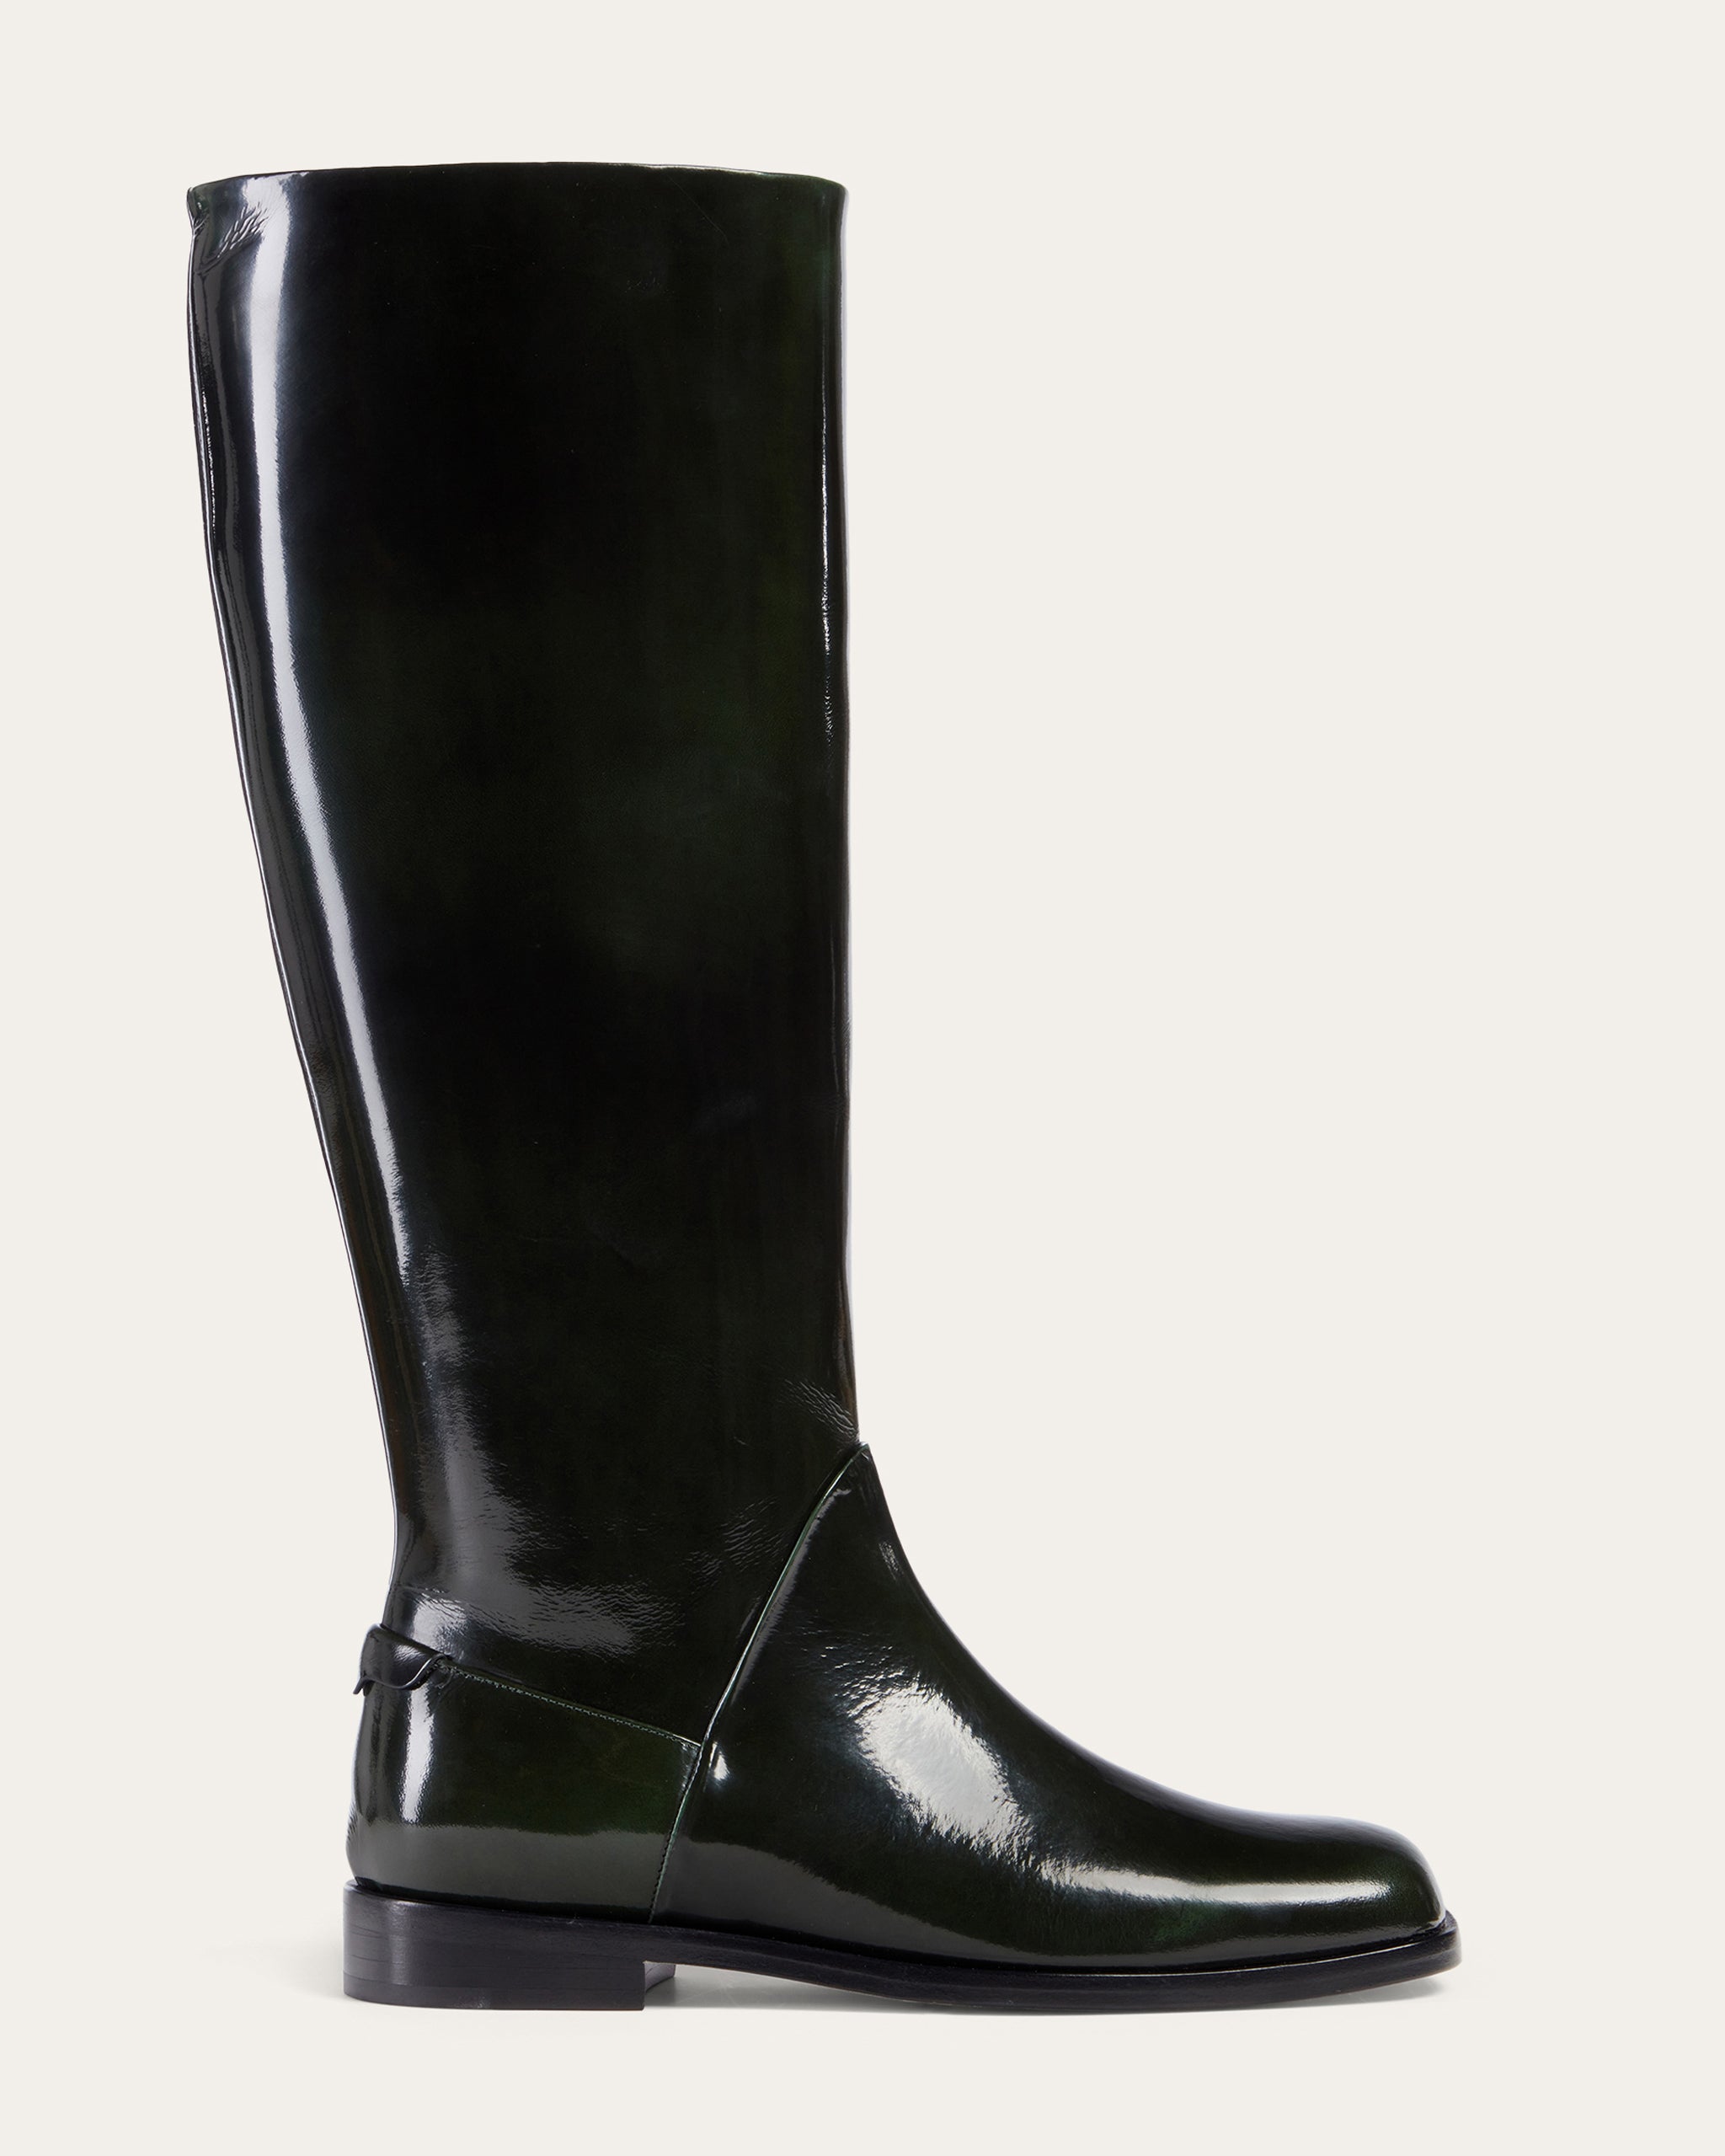 Image of Jia Boot, Bottle Green